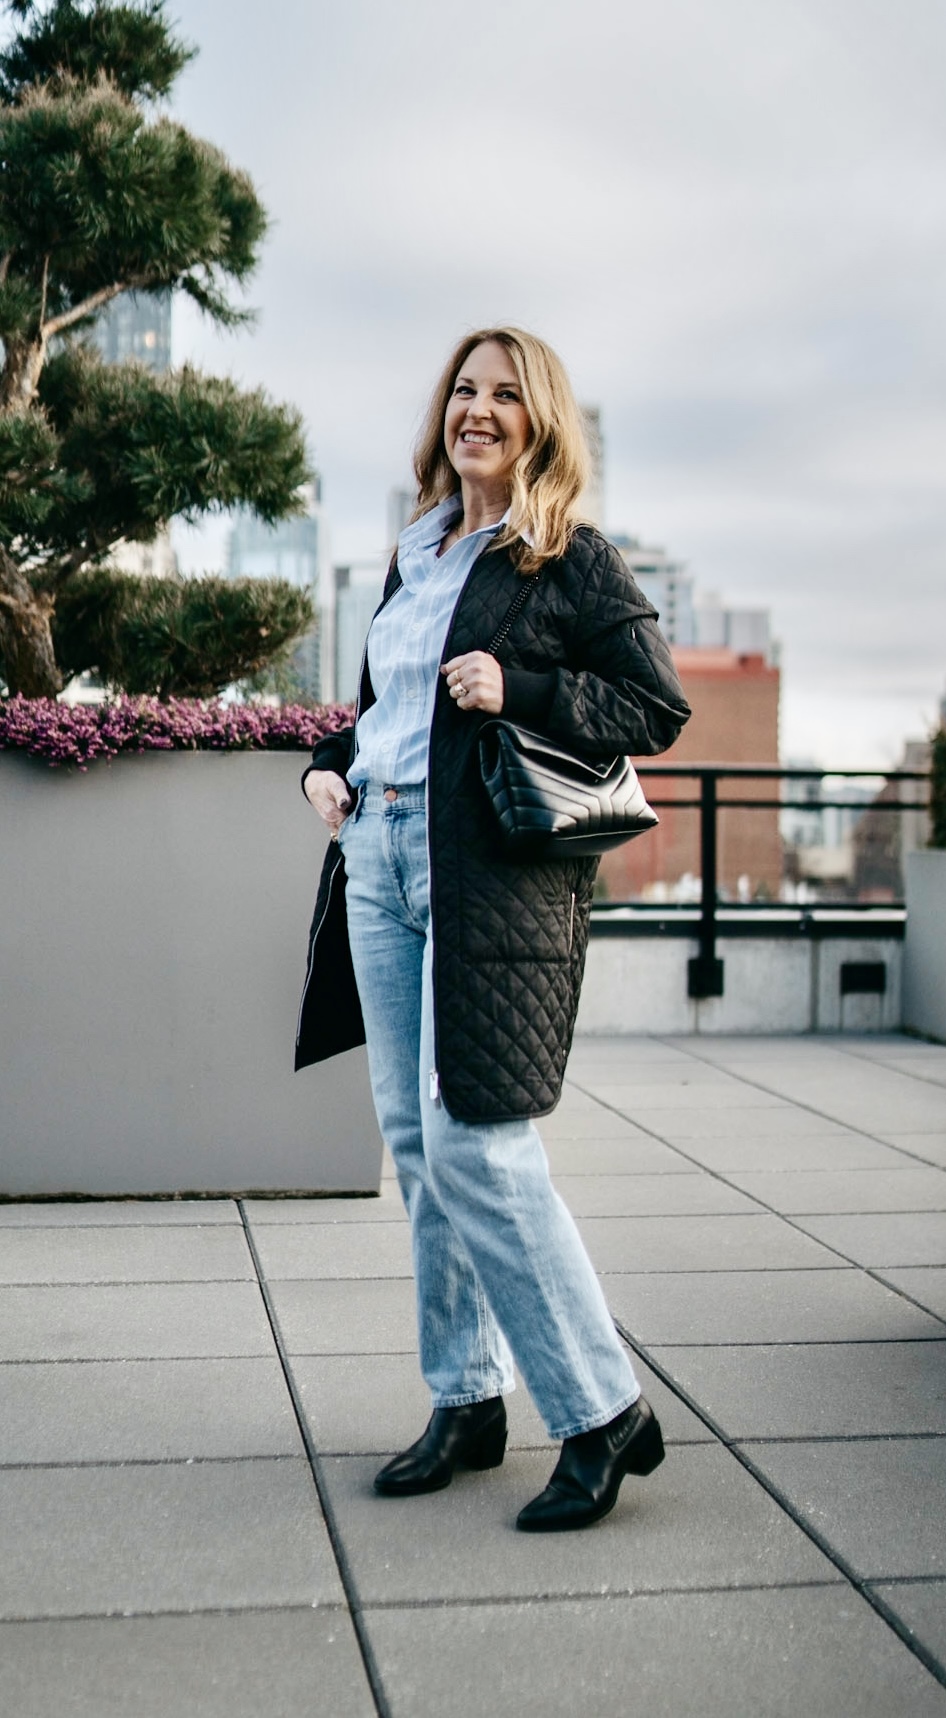 I'm a Former VIP Nordstrom Stylist—People That "Dress Well" Own These 7 Items